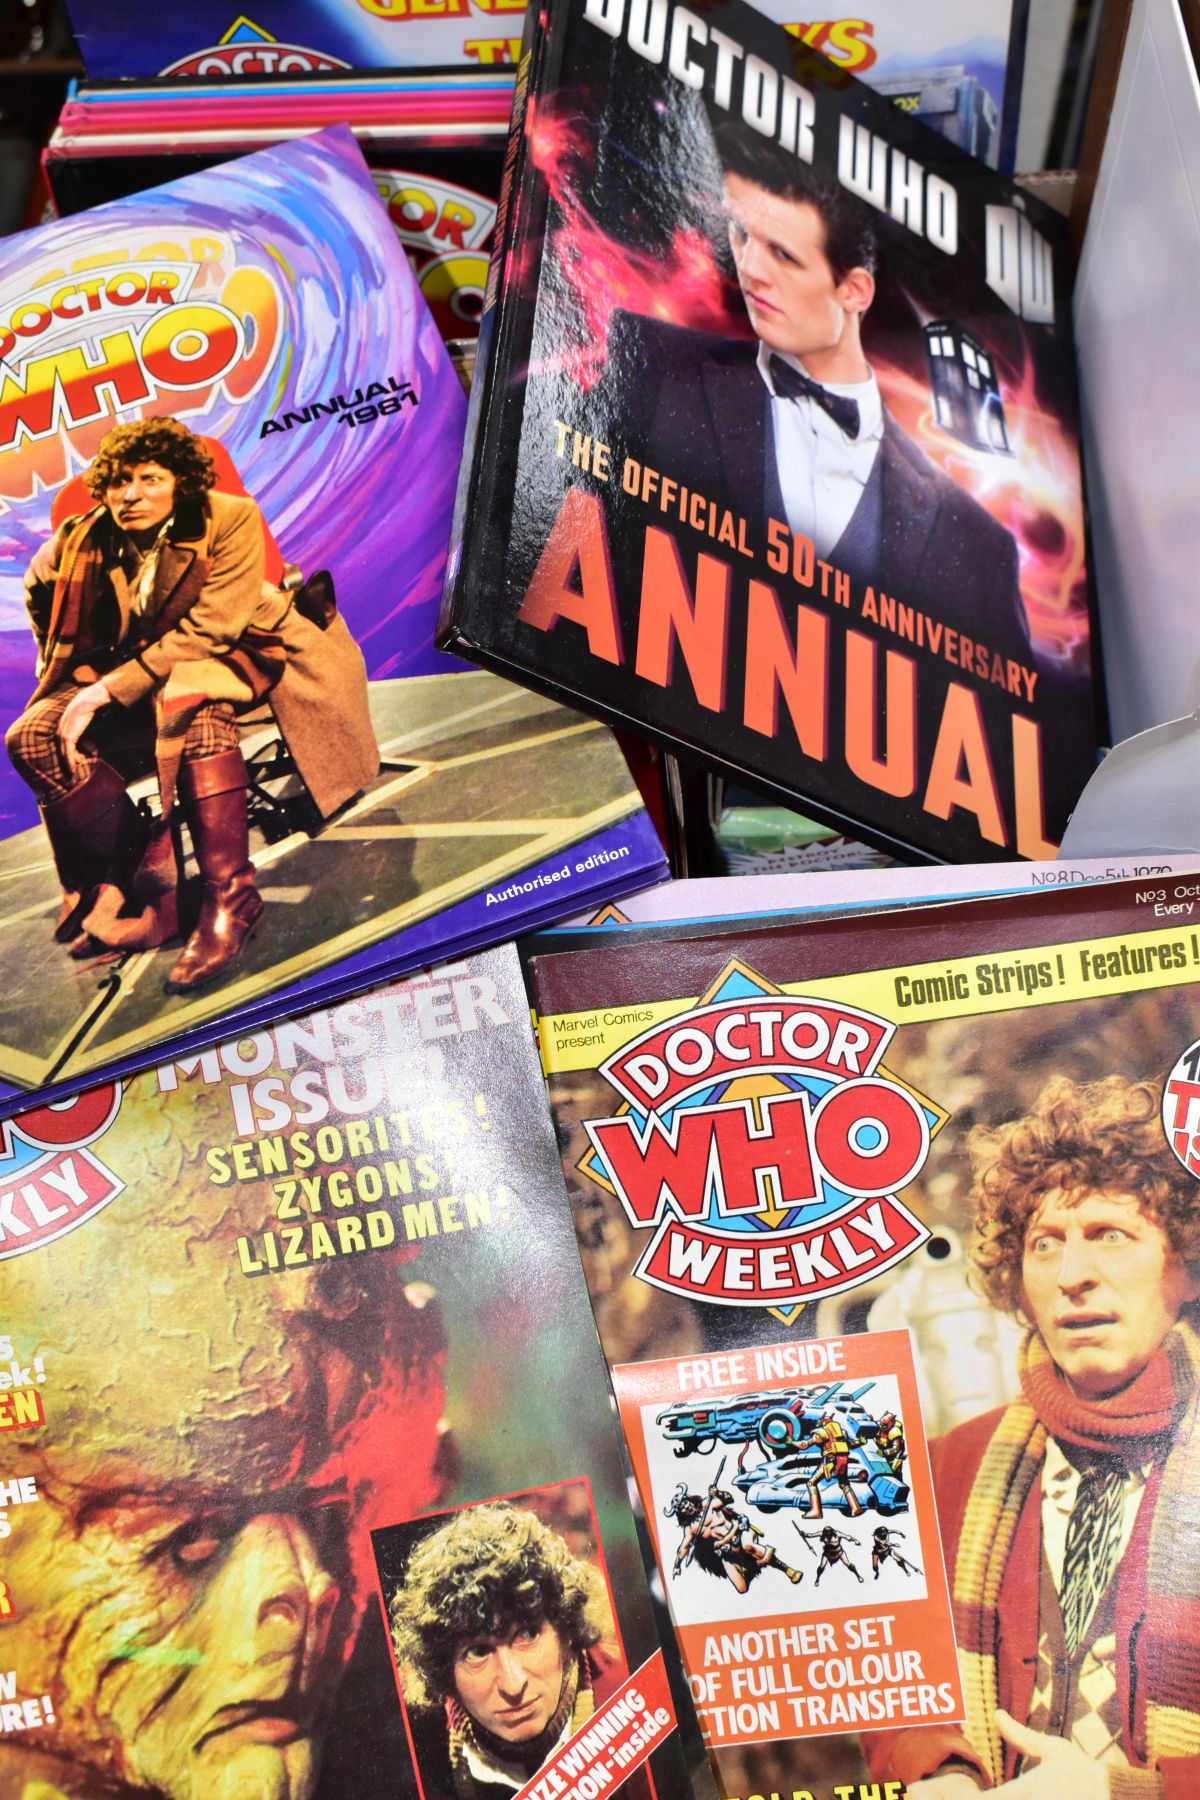 A COLLECTION OF DOCTOR WHO RELATED ITEMS, 1970's onwards, to include Mego Tom Baker era figure ( - Image 4 of 4